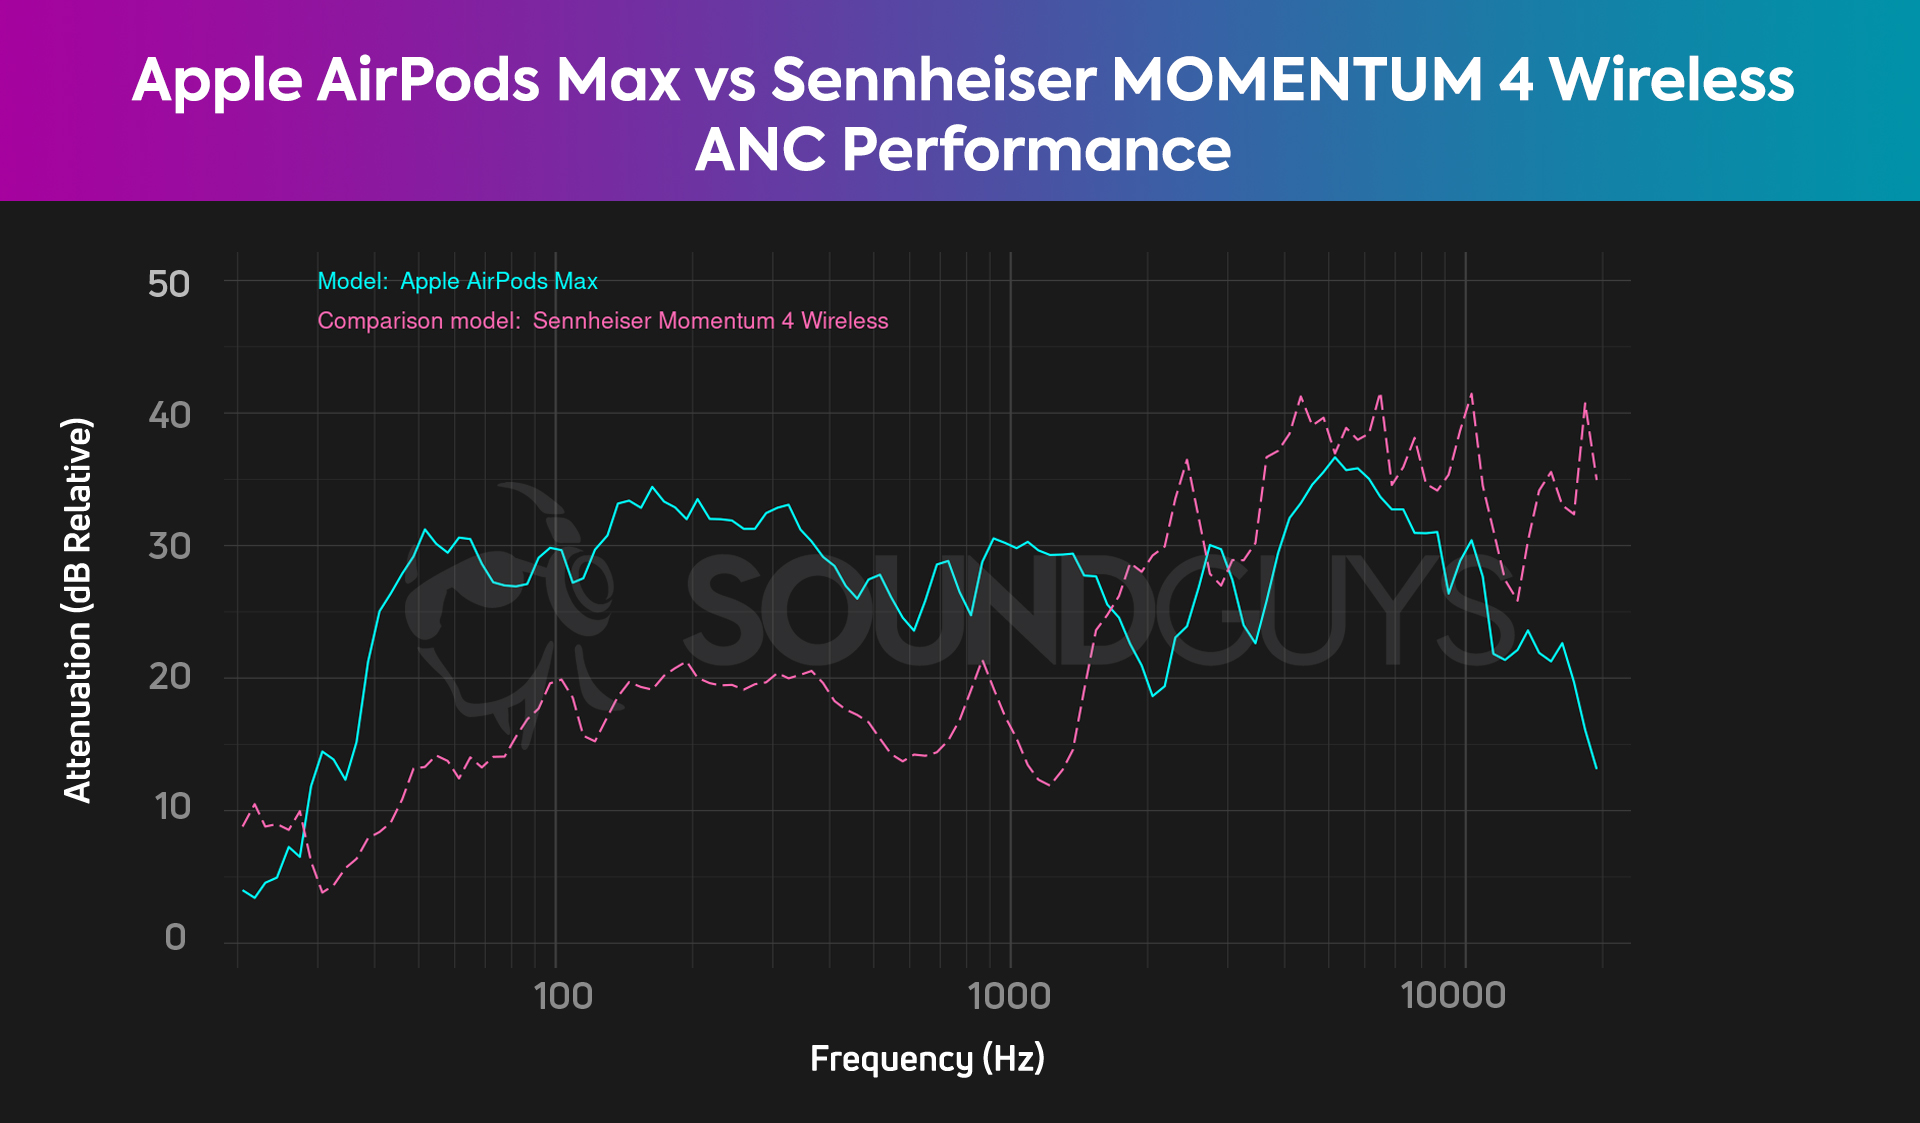 The noise cancellation comparison chart for the Apple AirPods Max compared to the Sennheiser MOMENTUM 4 Wireless, showing that the AirPods Max has better overall noise canceling.